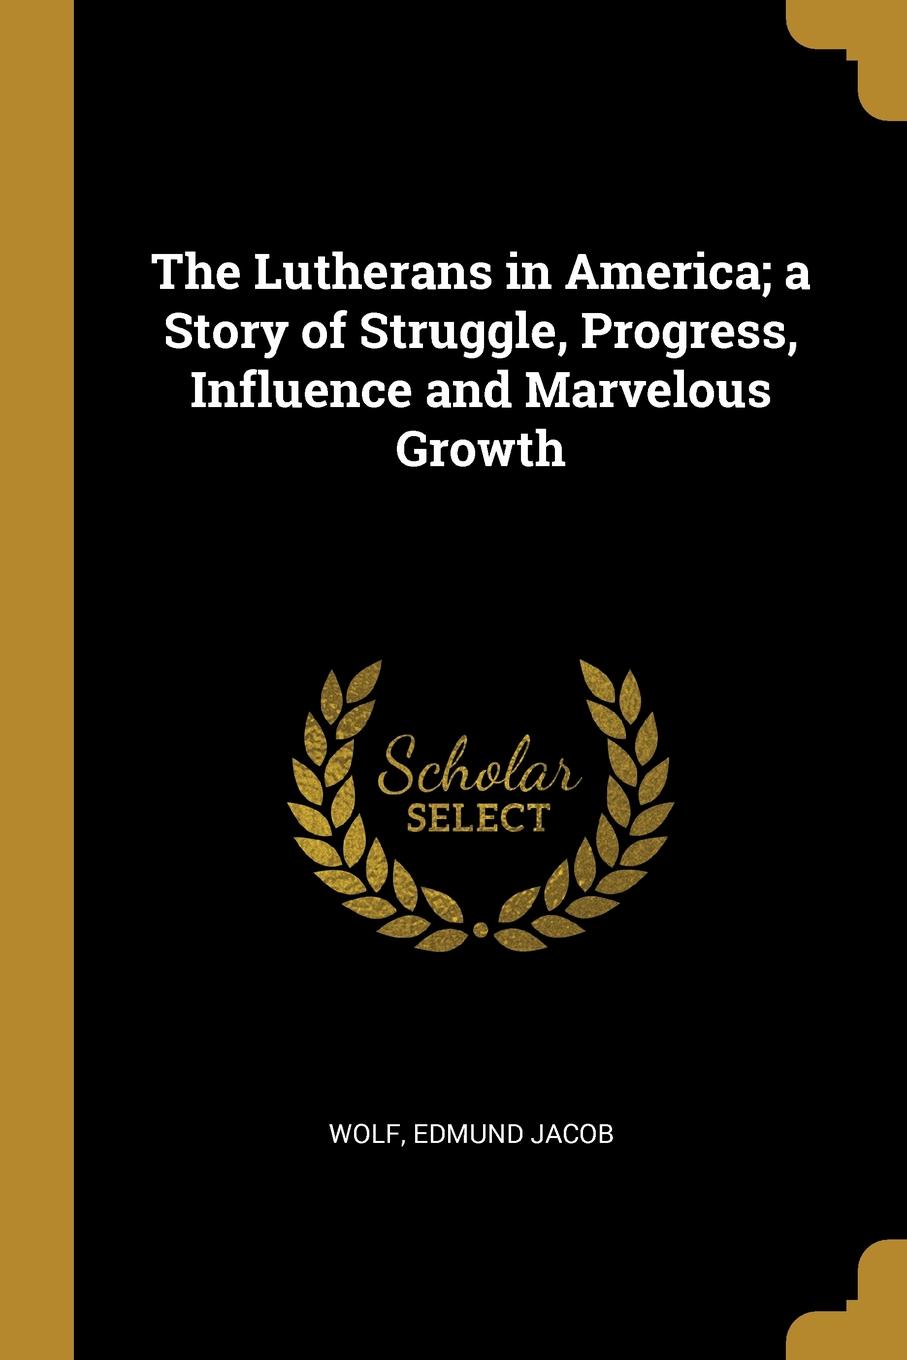 The Lutherans in America; a Story of Struggle, Progress, Influence and Marvelous Growth